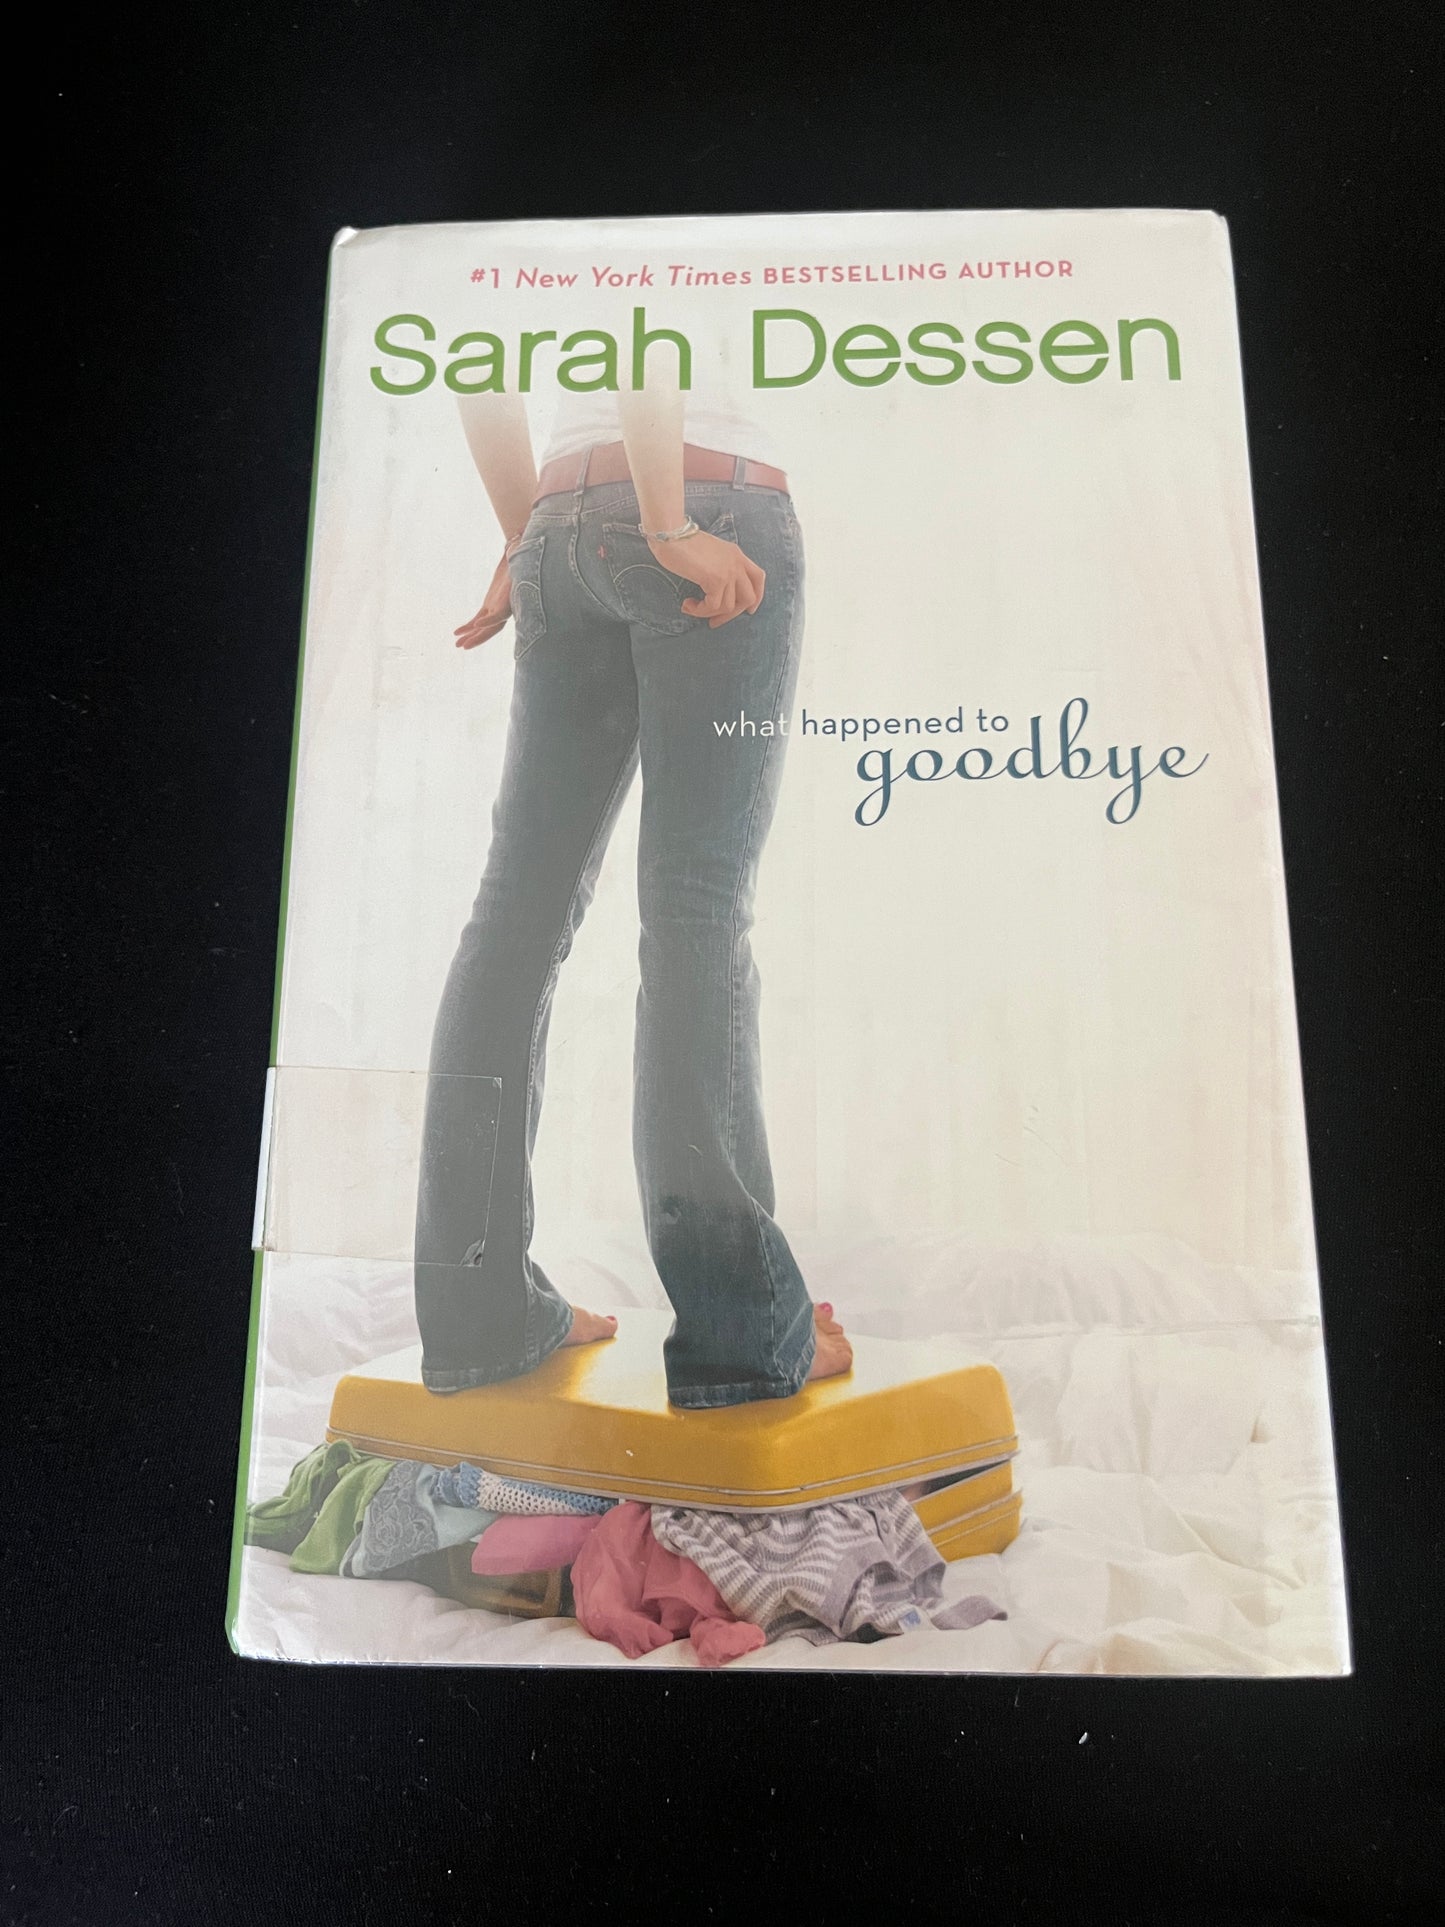 WHAT HAPPENED TO GOODBYE by Sarah Dessen